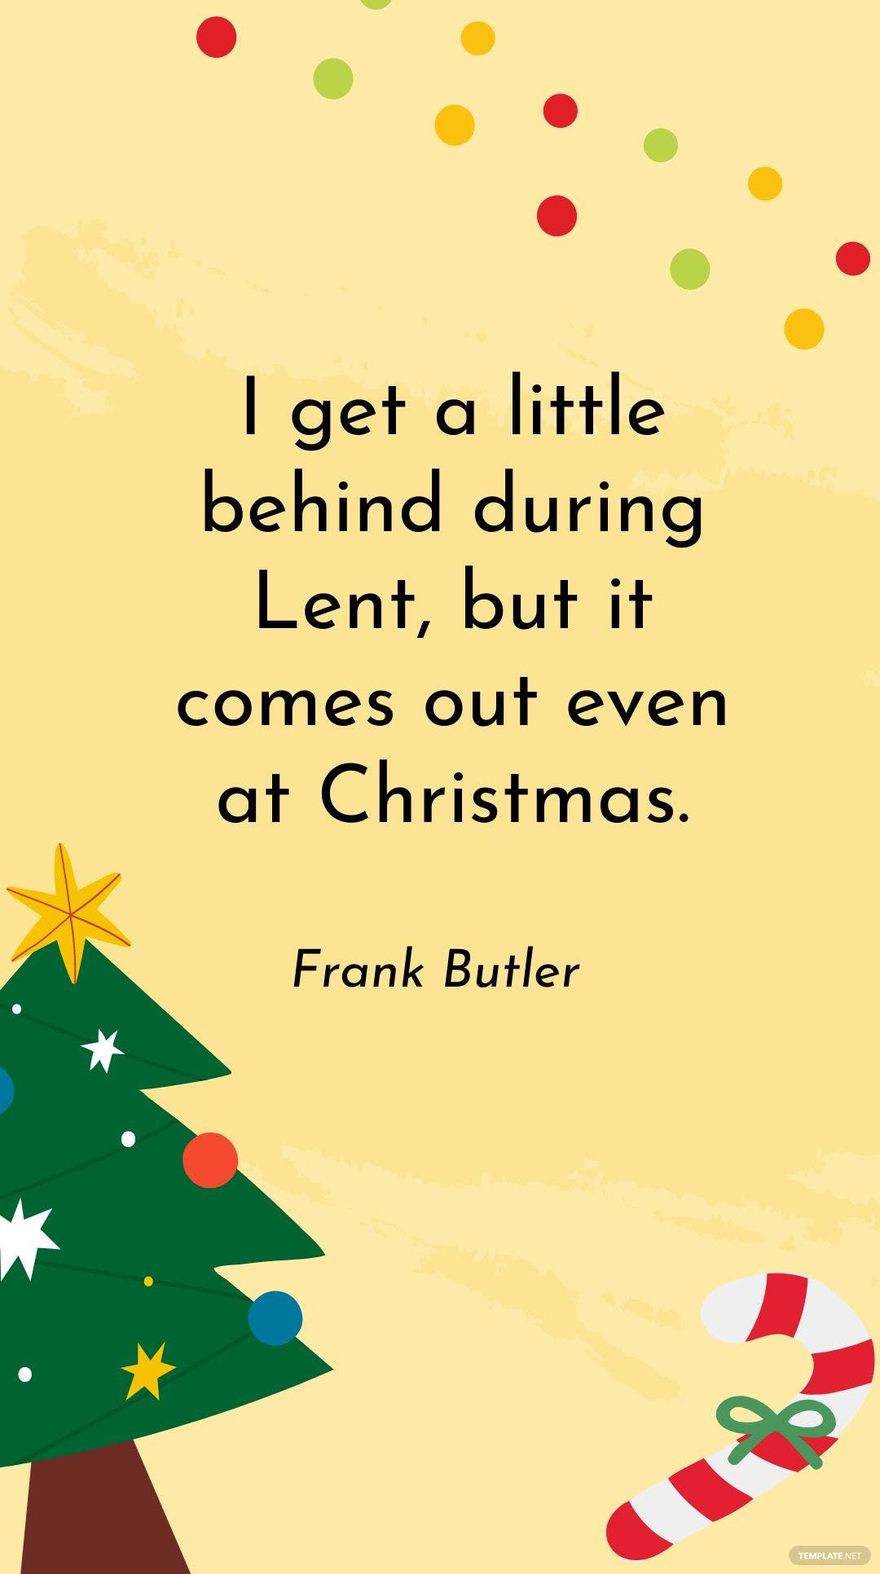 Frank Butler - I get a little behind during Lent, but it comes out even at Christmas. in JPG